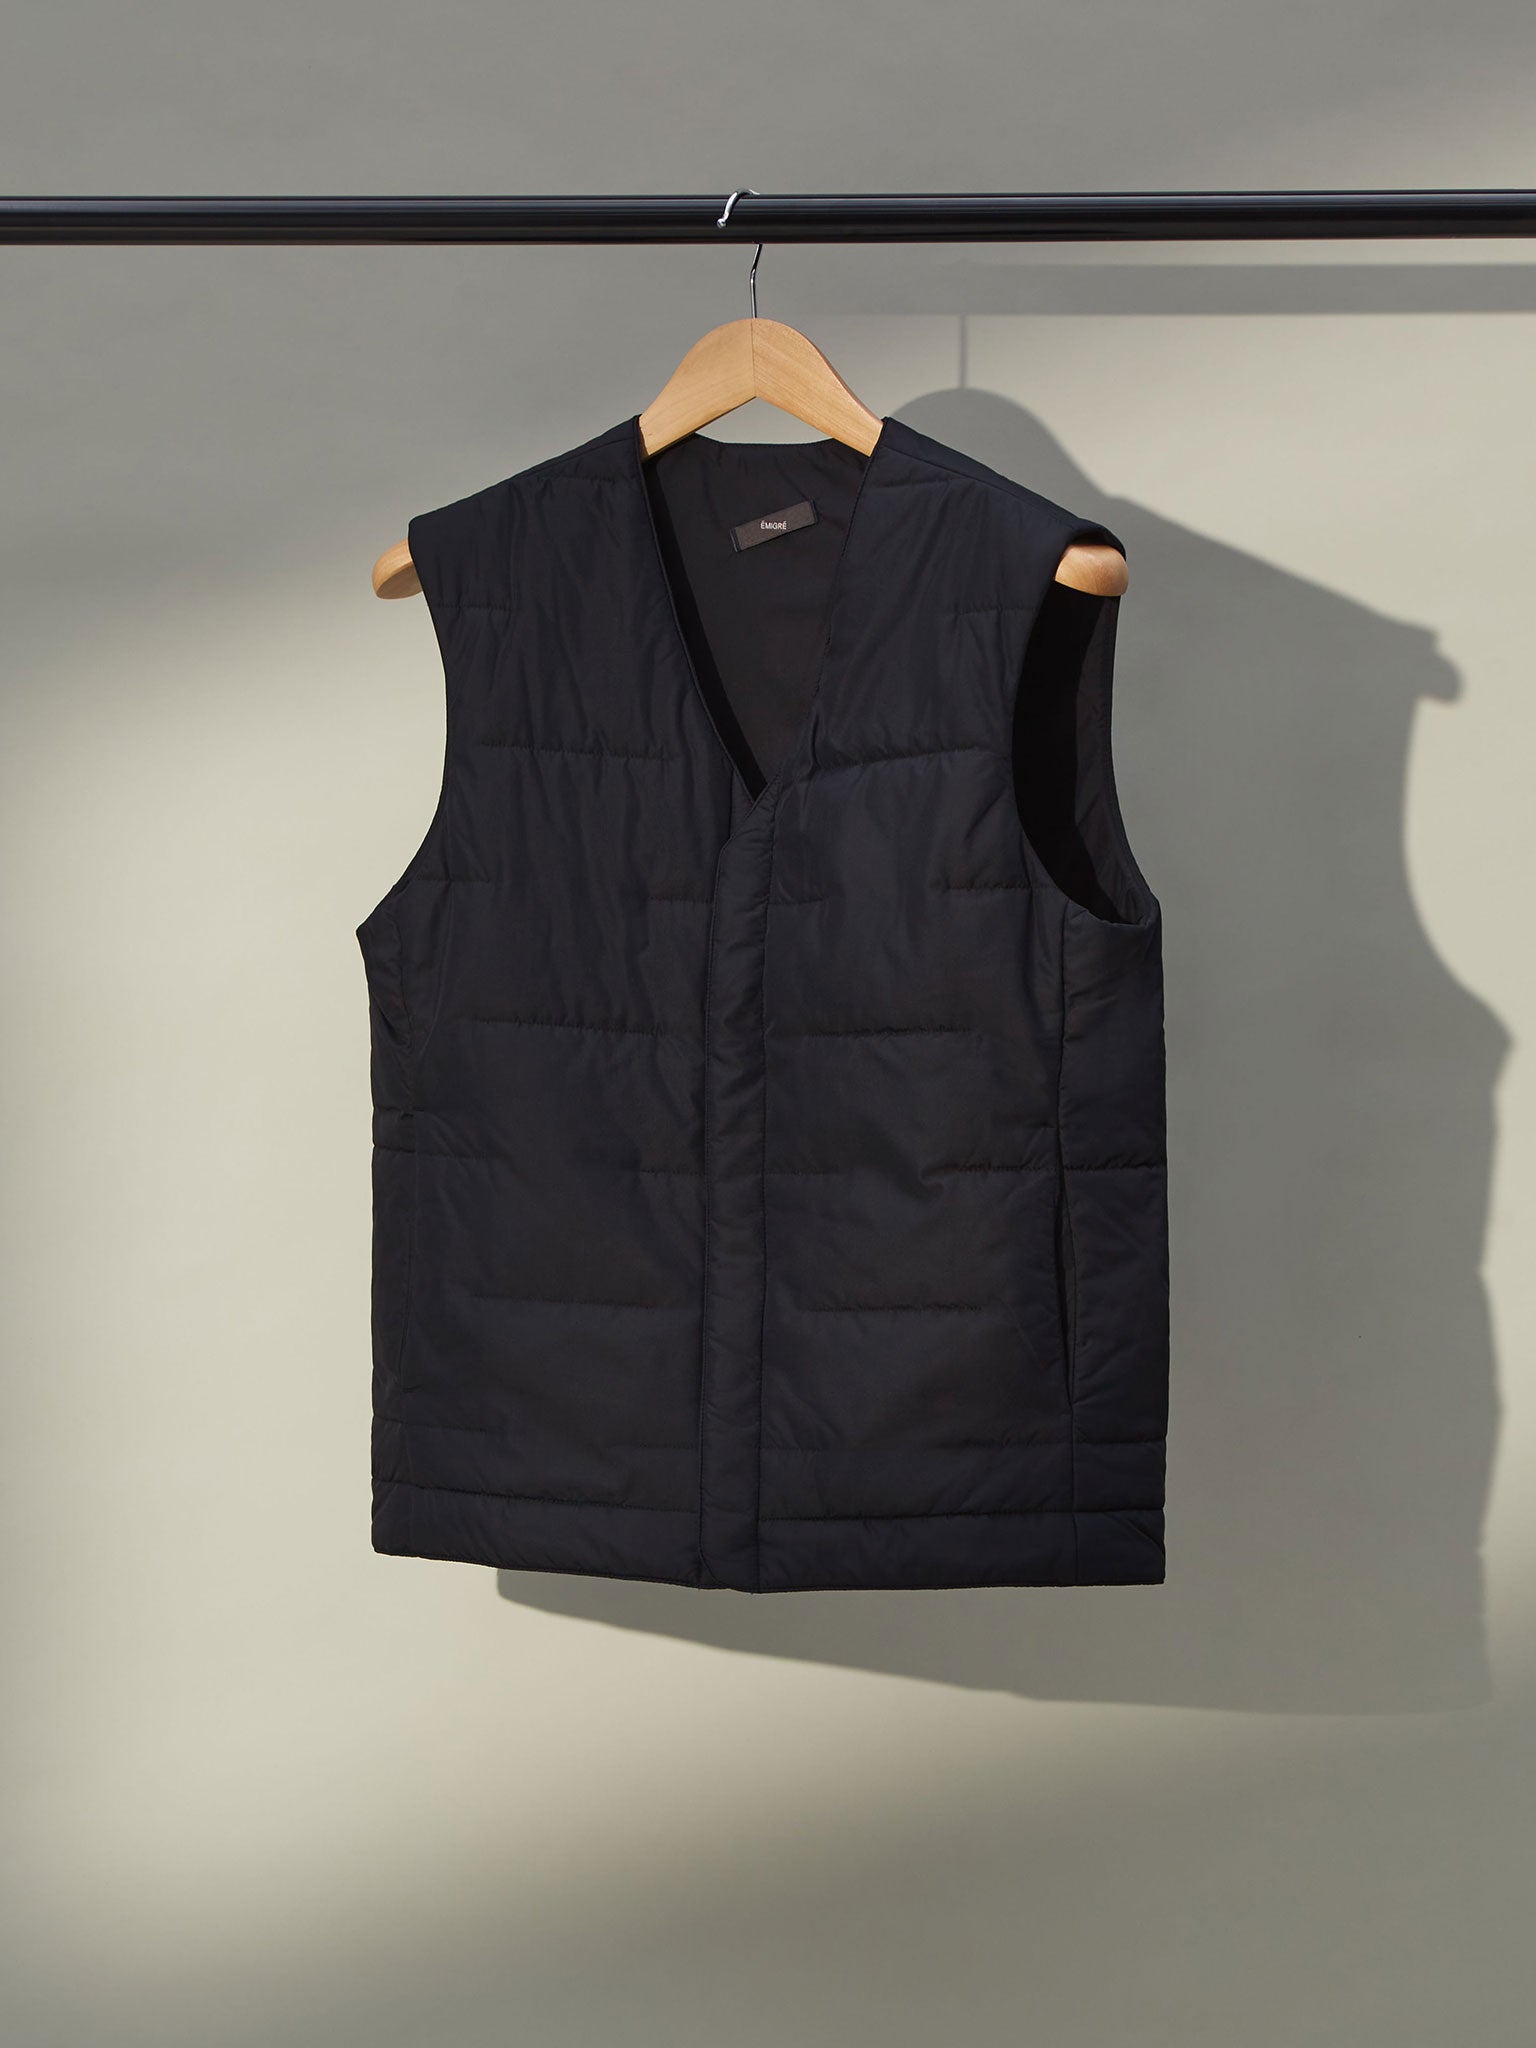 Stay Cozy and Fashionable with this Blue Gilet for Men - The Ideal Layering Piece for Every Outfit